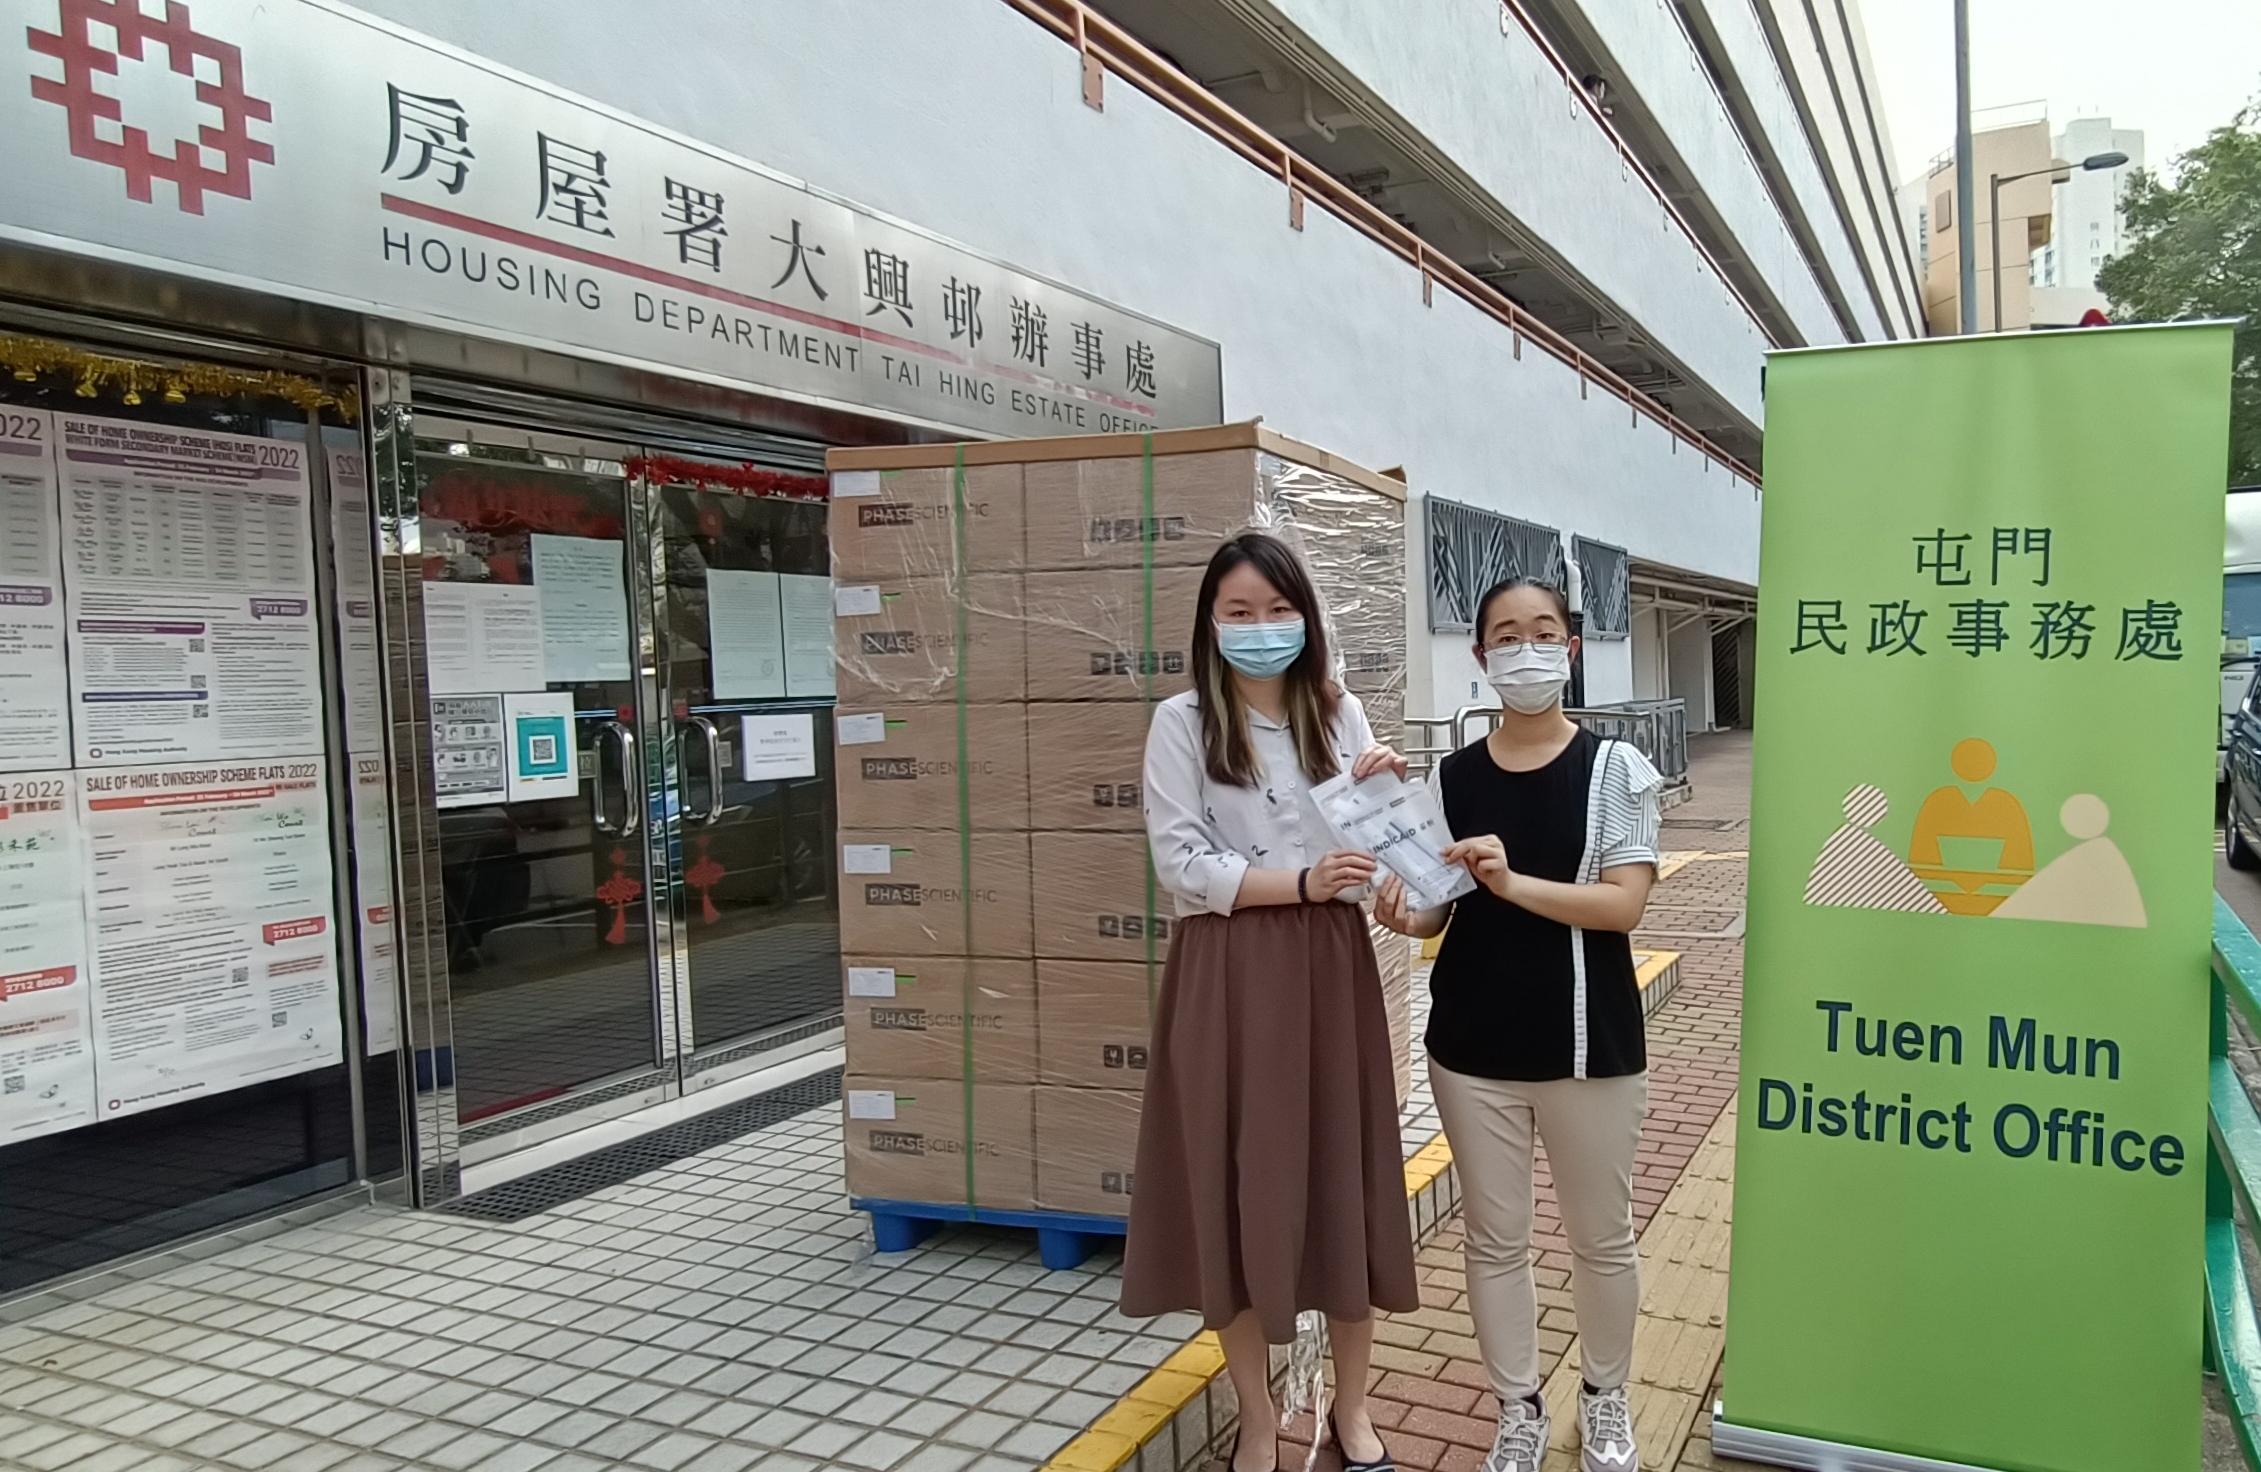 The Tuen Mun District Office today (March 19) distributed COVID-19 rapid test kits to households, cleansing workers and property management staff living and working in Tai Hing Estate for voluntary testing through the Housing Department and the property management company.

